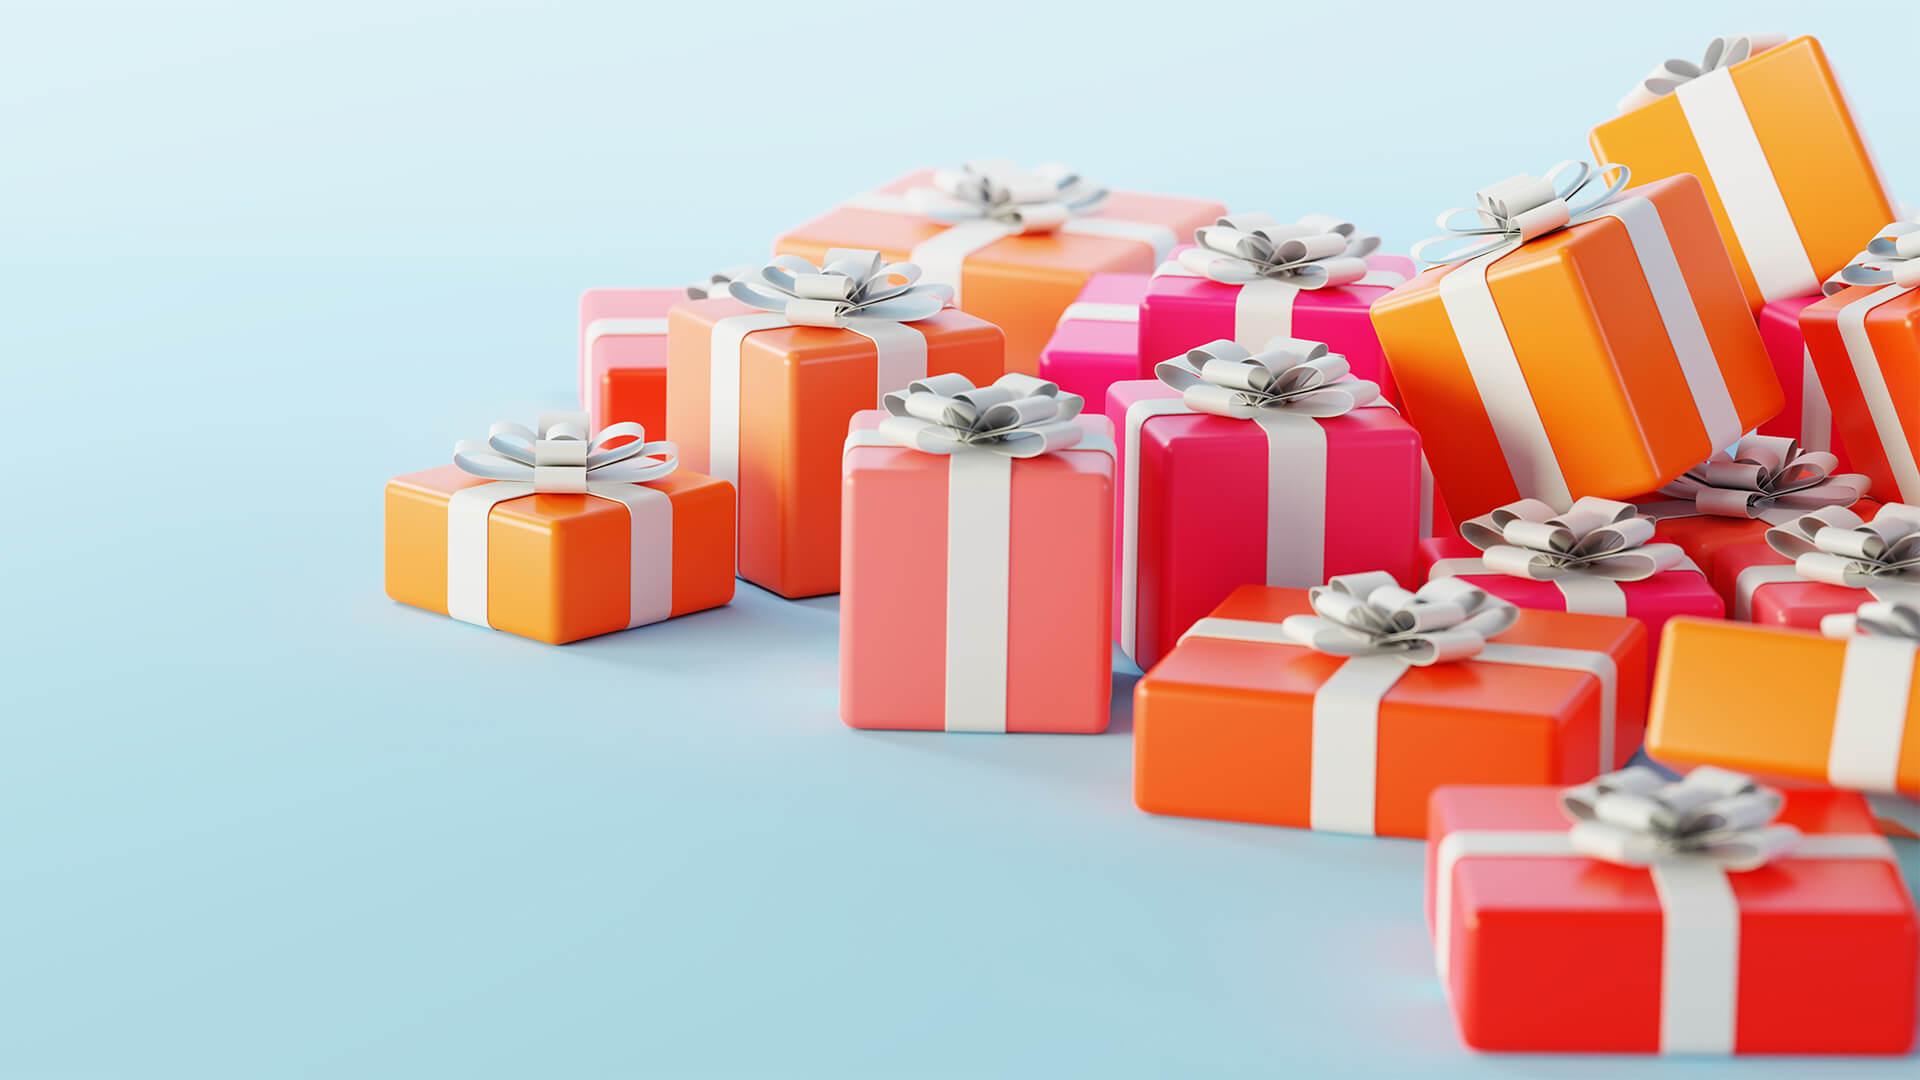 Gift Ideas: The most popular items ordered as gifts in